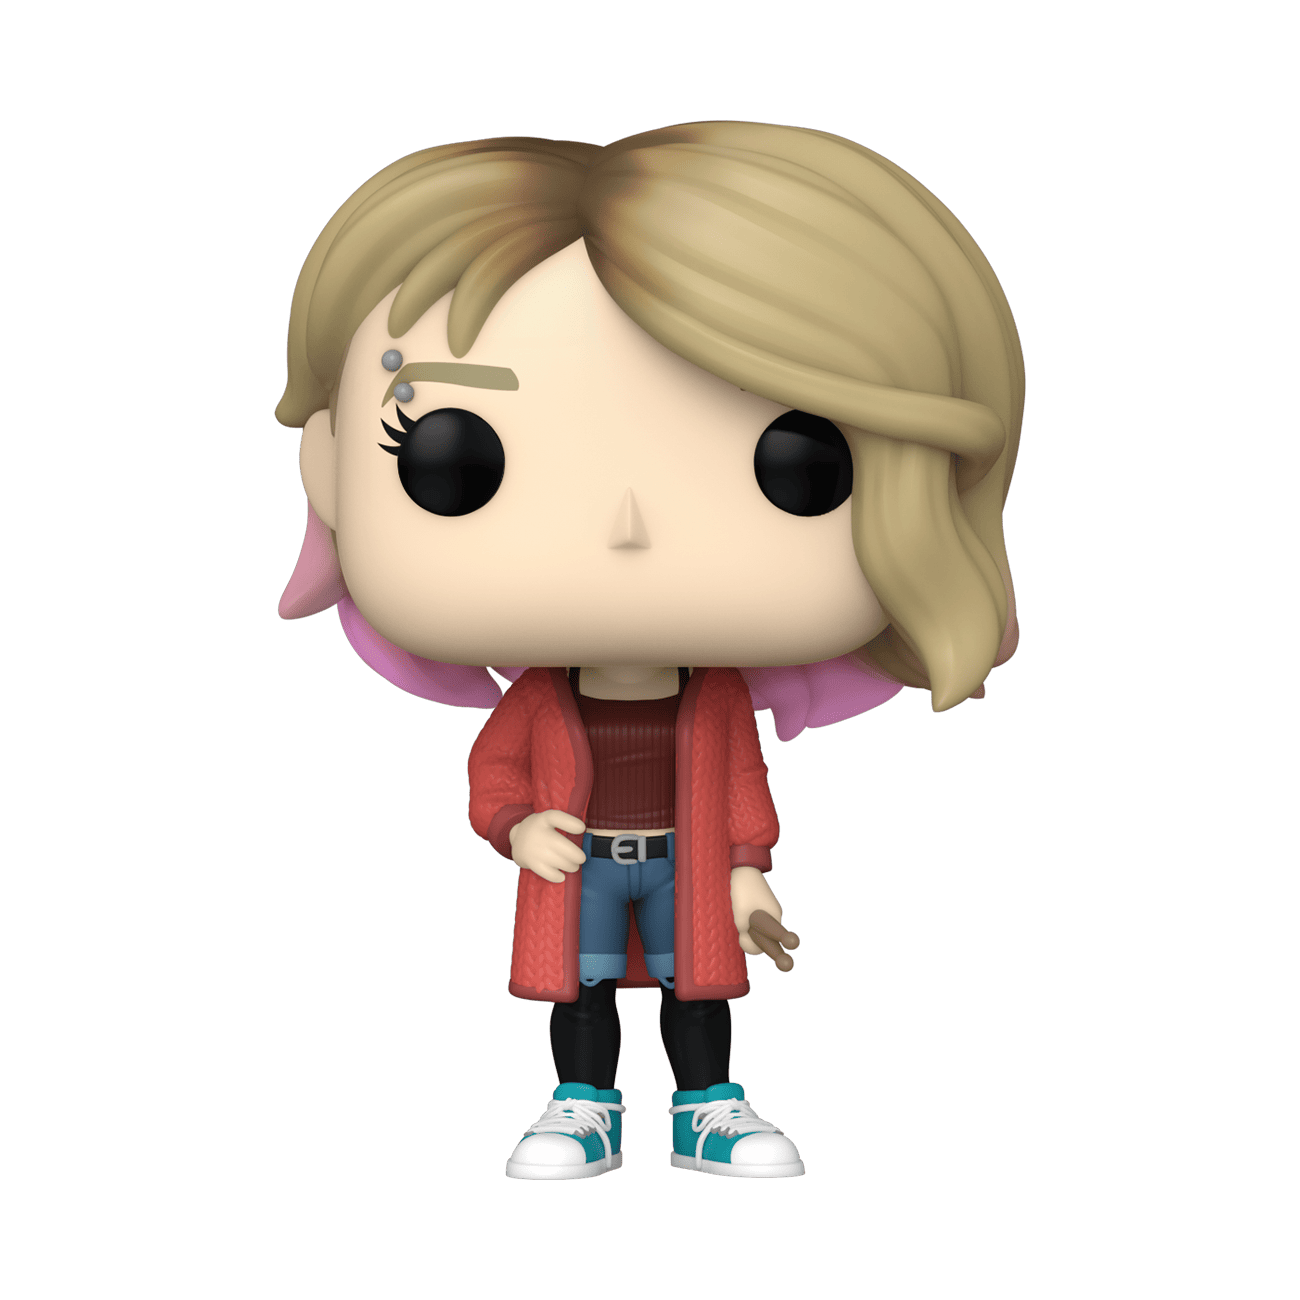 The GameStop exclusive Pop! Gwen Stacy from Spider-Man: Across the Spider-Verse.